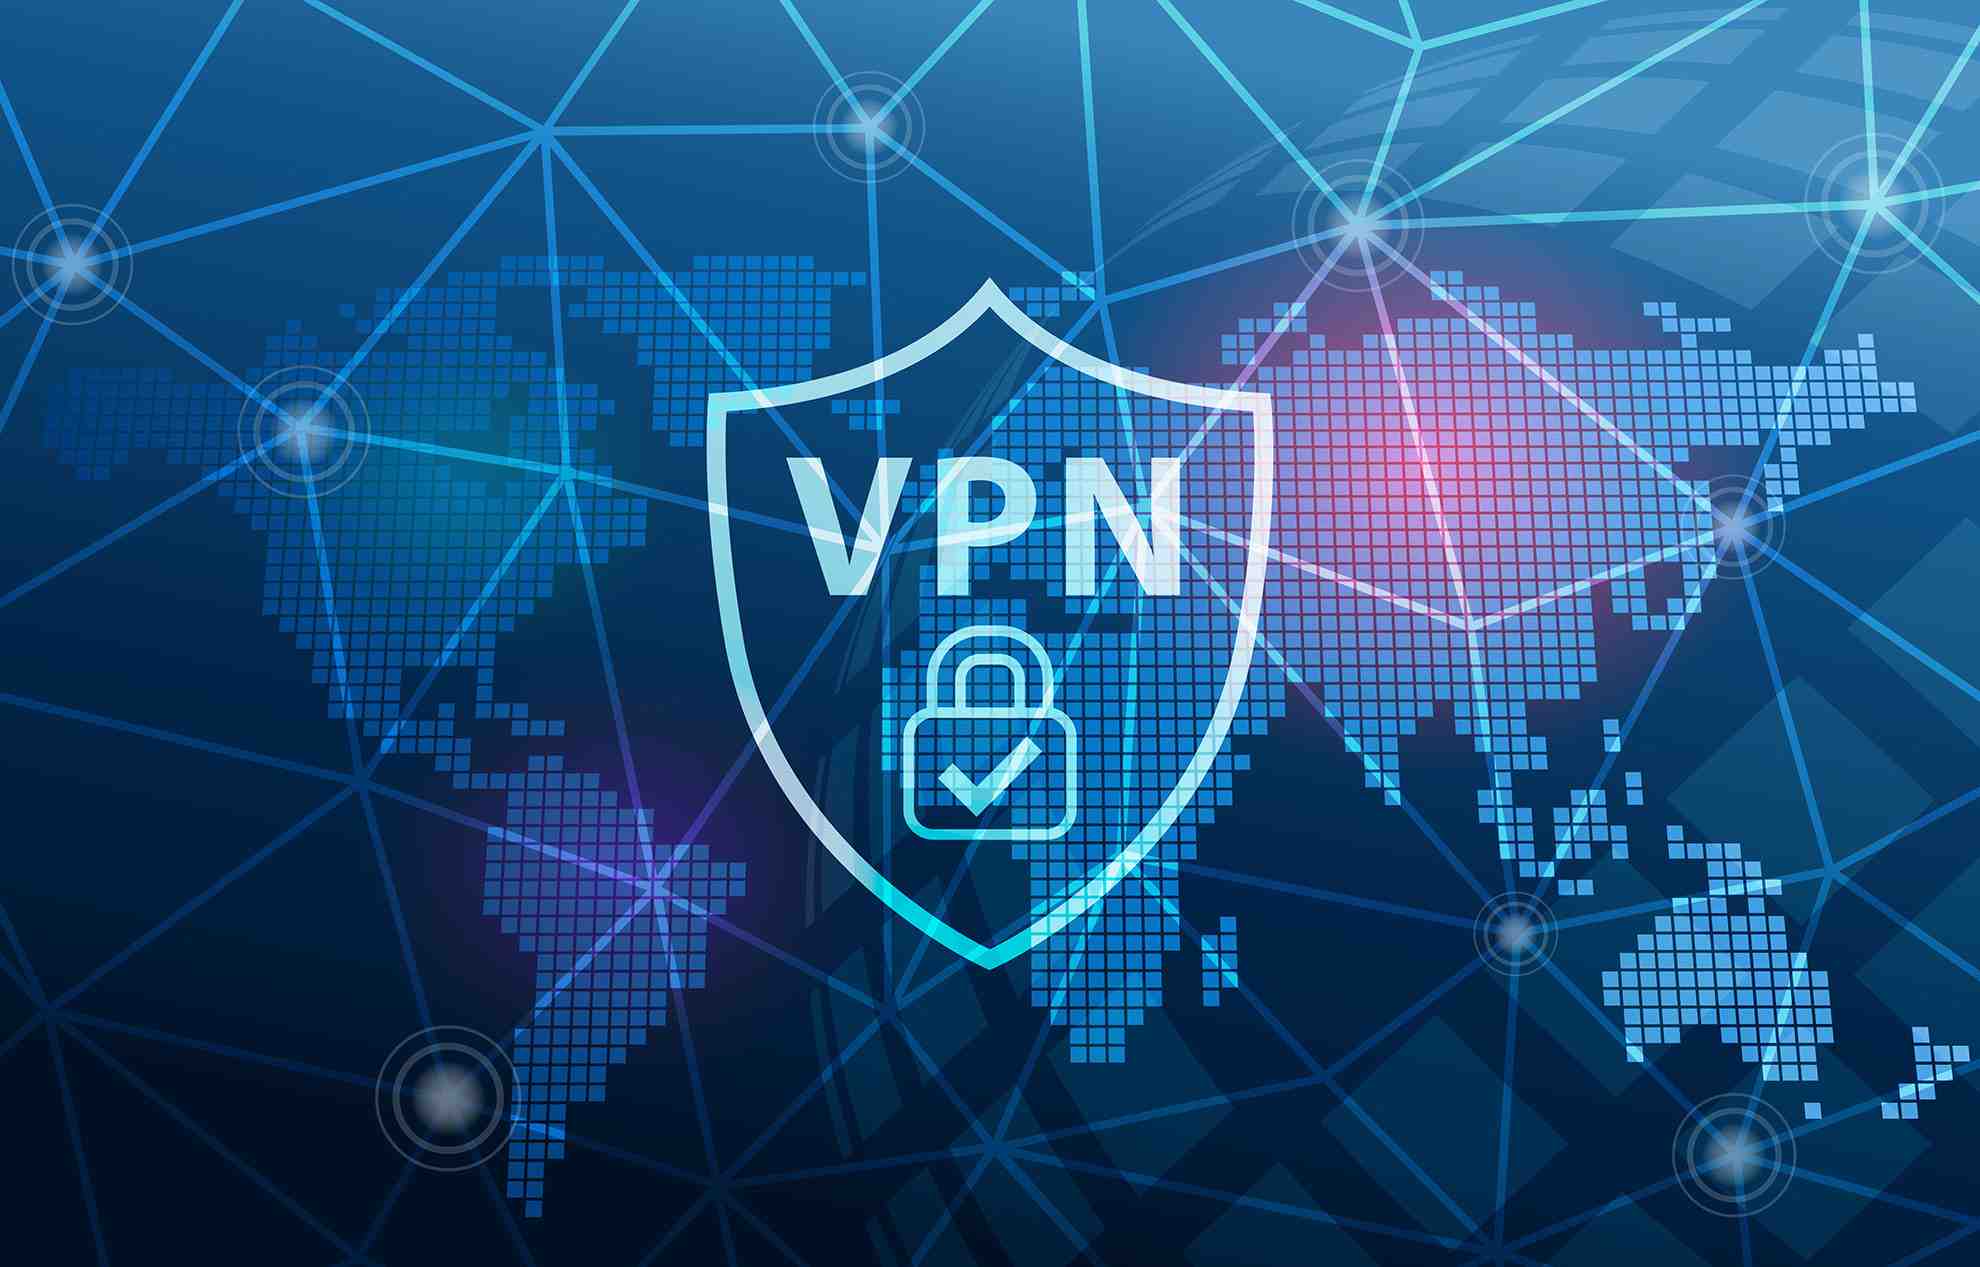 How fast is VPN Unlimited?